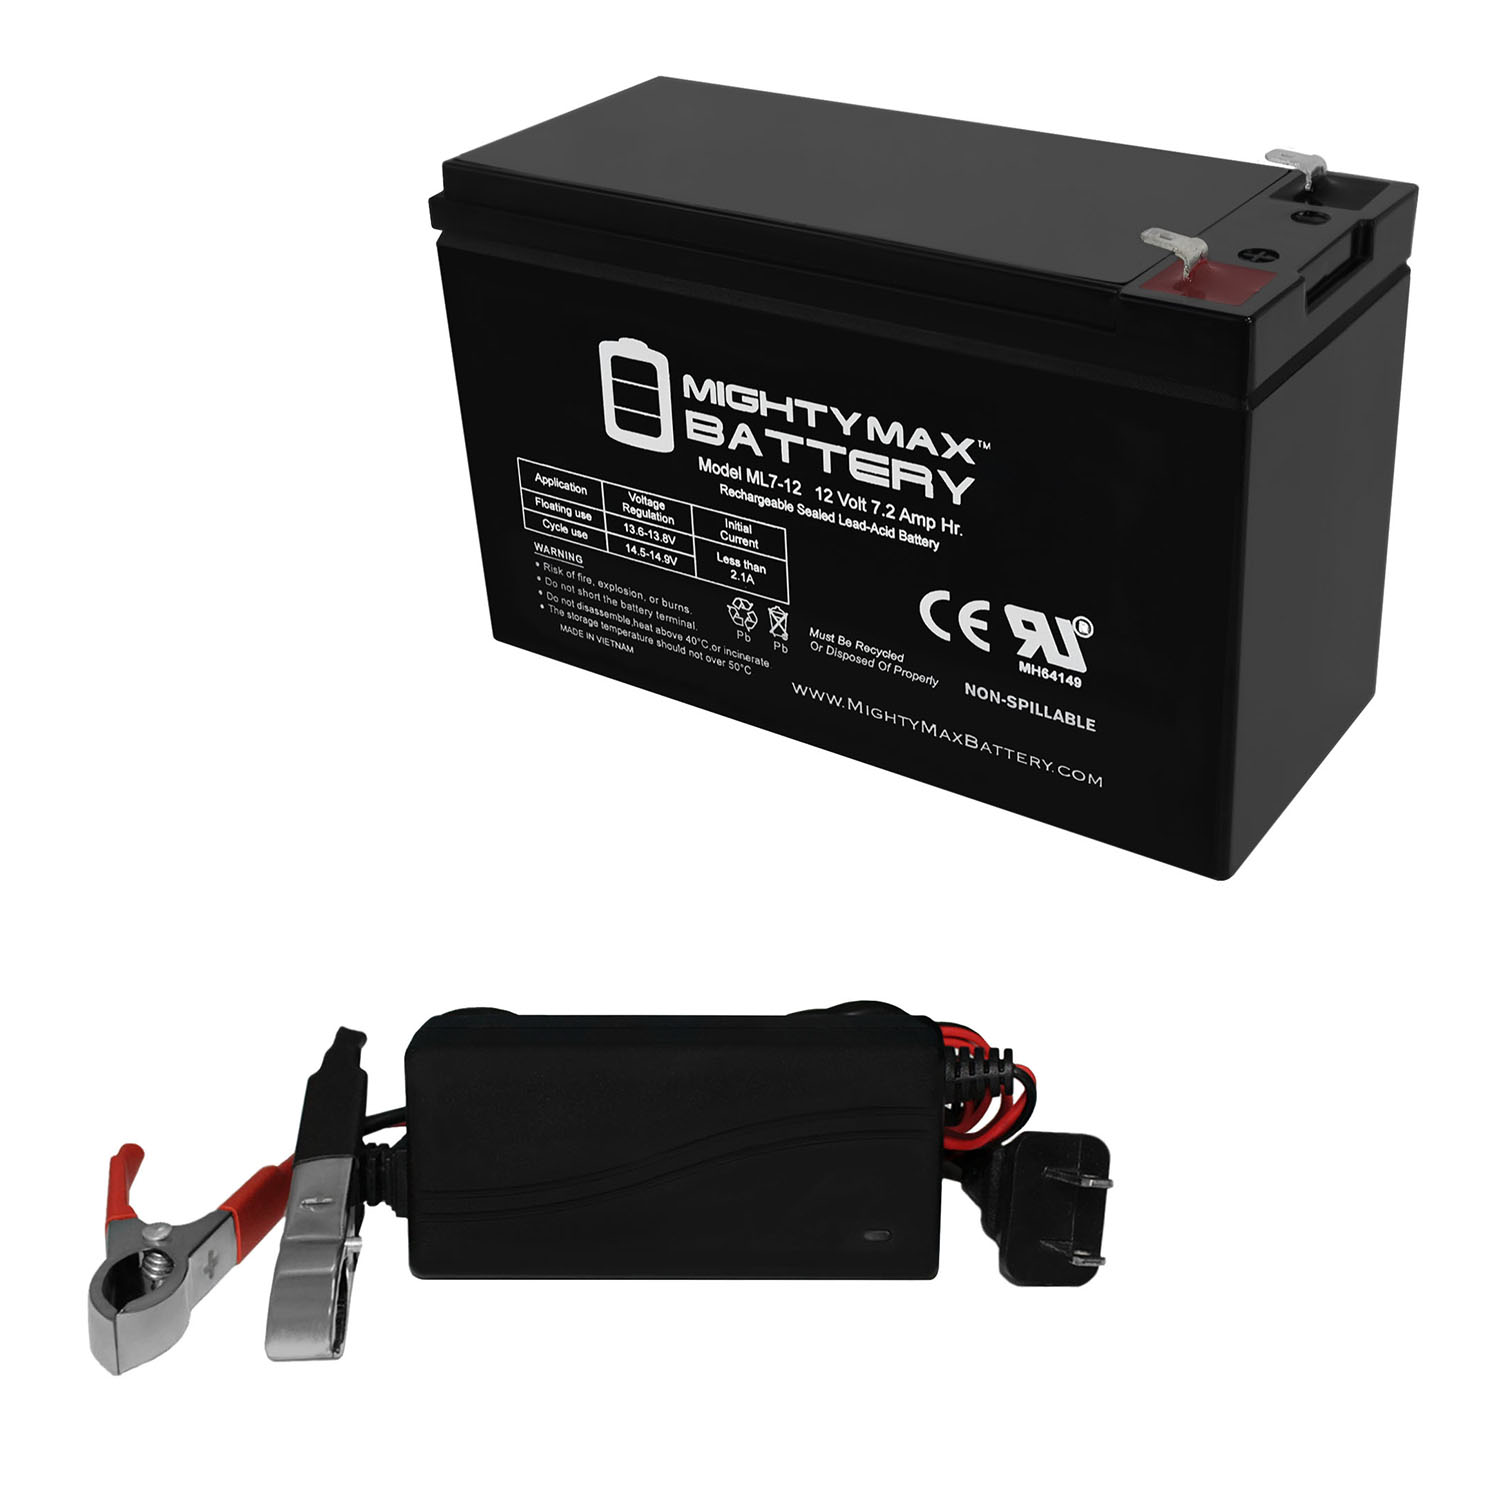 Mighty Max Battery 12V 7.2AH Belkin F6C127 UPS Btty Replacement + 12V 1Amp Charger